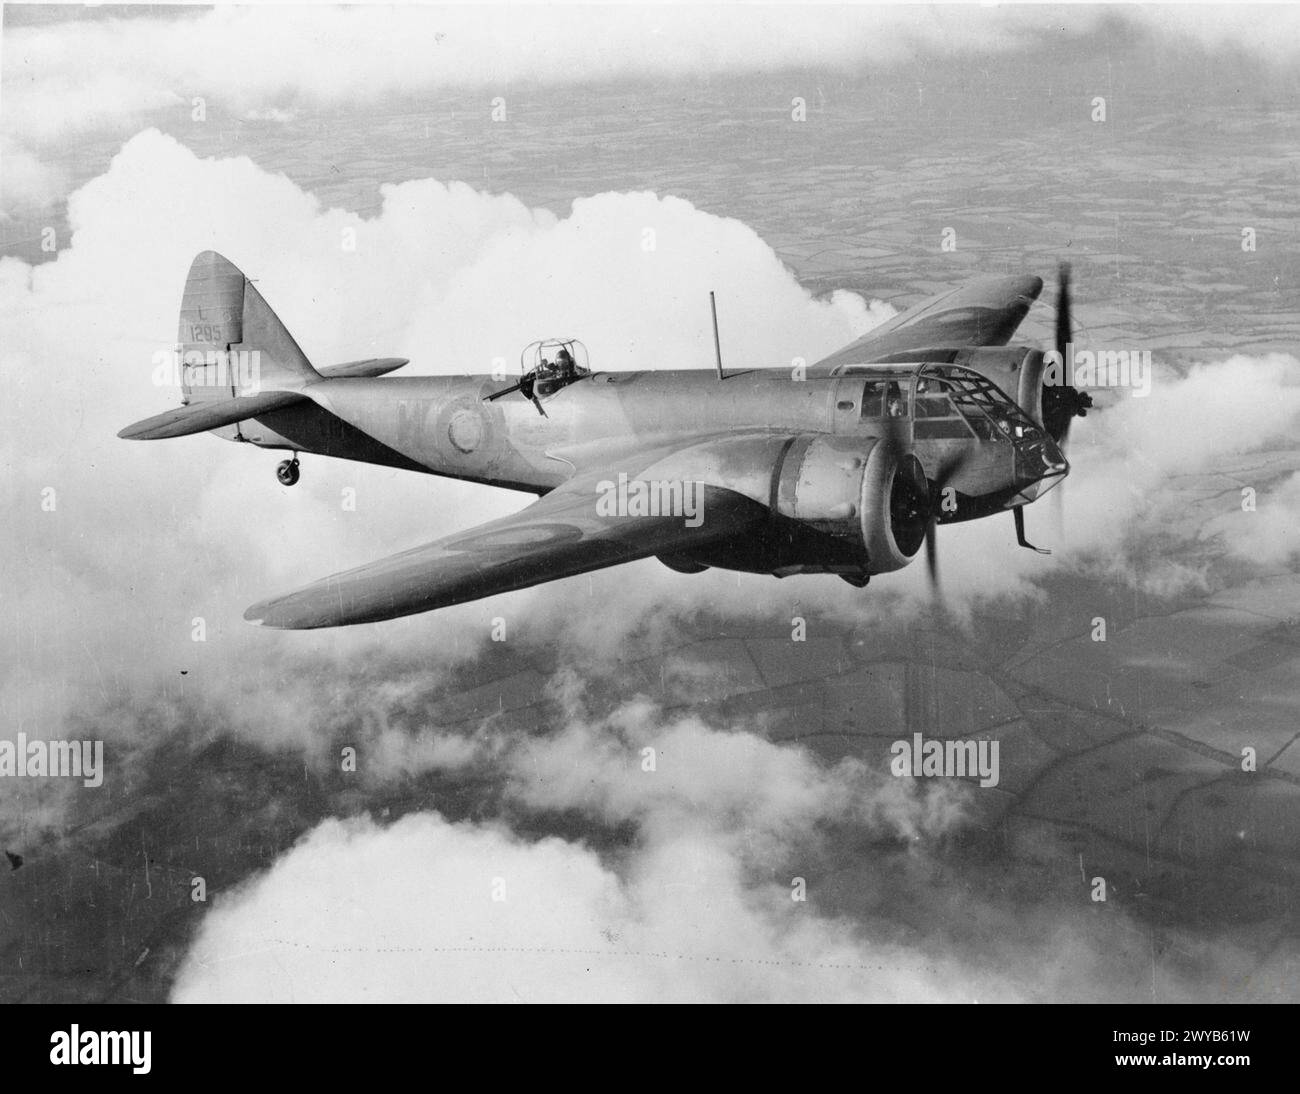 AIRCRAFT OFTHE ROYAL AIR FORCE, 1939-1941: BRISTOL TYPE 142M BLENHEIM I. - Bristol Blenheim Mark I, L1295 in flight above the clouds. This aircraft commenced service in August 1938 with No. 107 Squadron RAF, followed by No. 600 Squadron RAF, the Royal Aircraft Establishment, No. 54 Operational Training Unit, RAF Cranwell, No. 3 Radio School, and finally No. 12 (Pilots) Advanced Flying Unit, with whom she was damaged beyond repair after crash-landing at Harlaxton on 29 July 1943. For reasons not known, the fuselage roundel and unit code were painted out at the time this photograph was taken. , Stock Photo